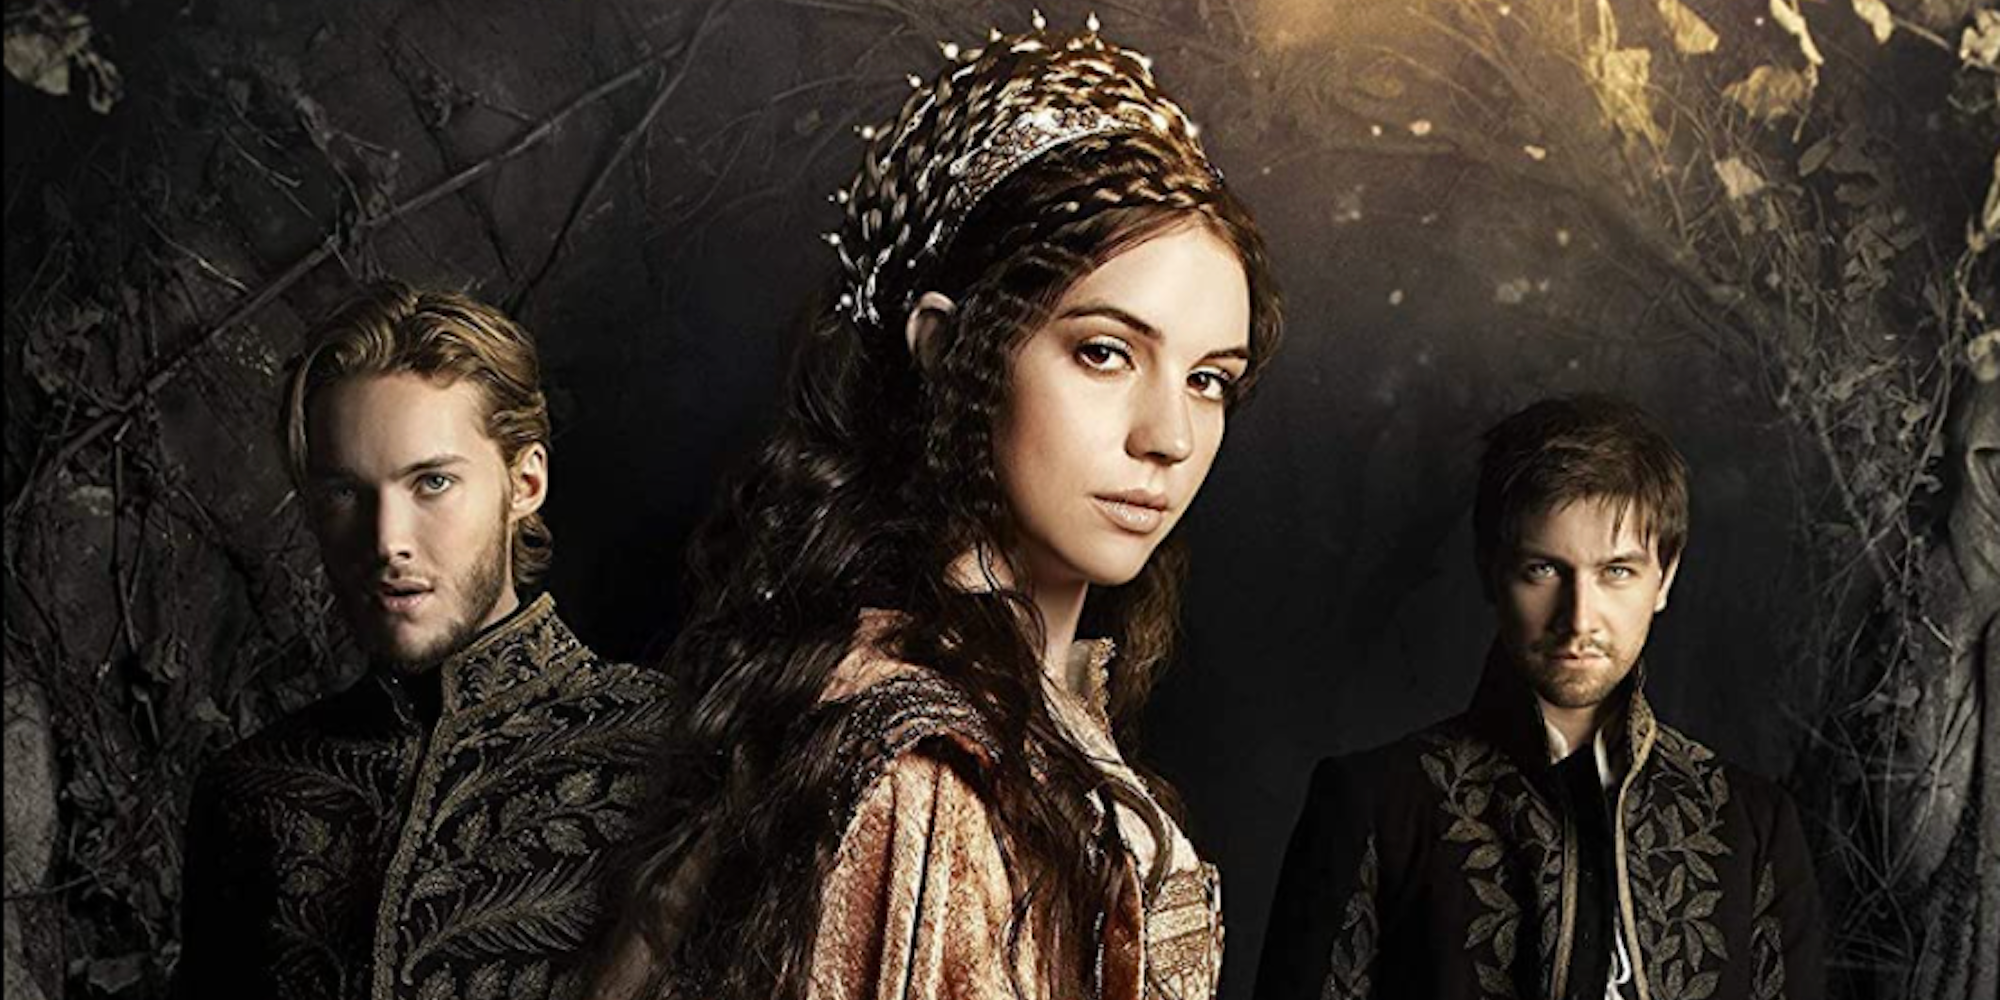 The cast of Reign, including Adelaide Kane, Torrance Coombs and Tony Regbo